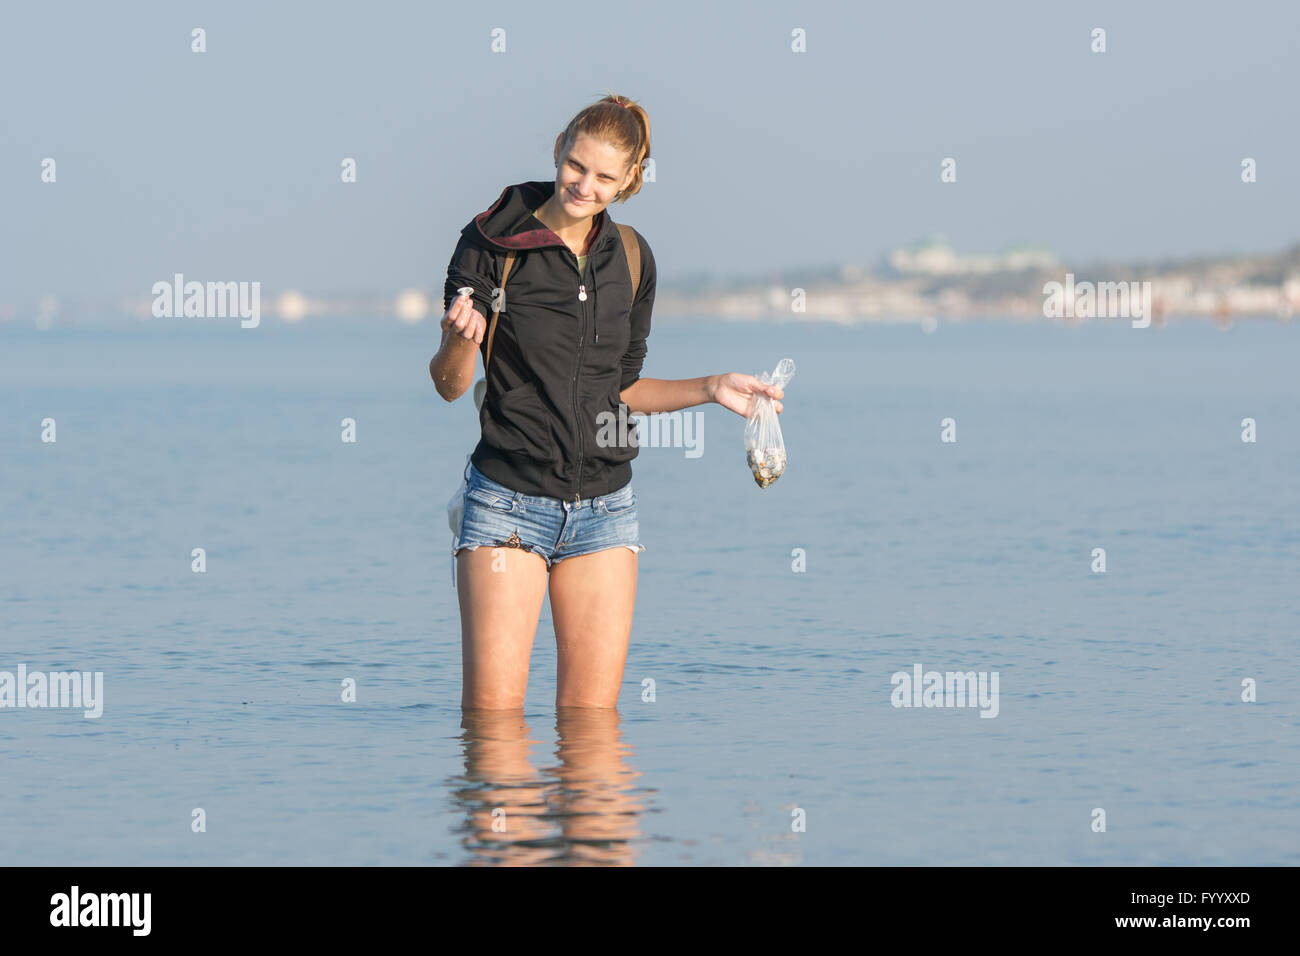 She collects shells at the sea early in the morning Stock Photo